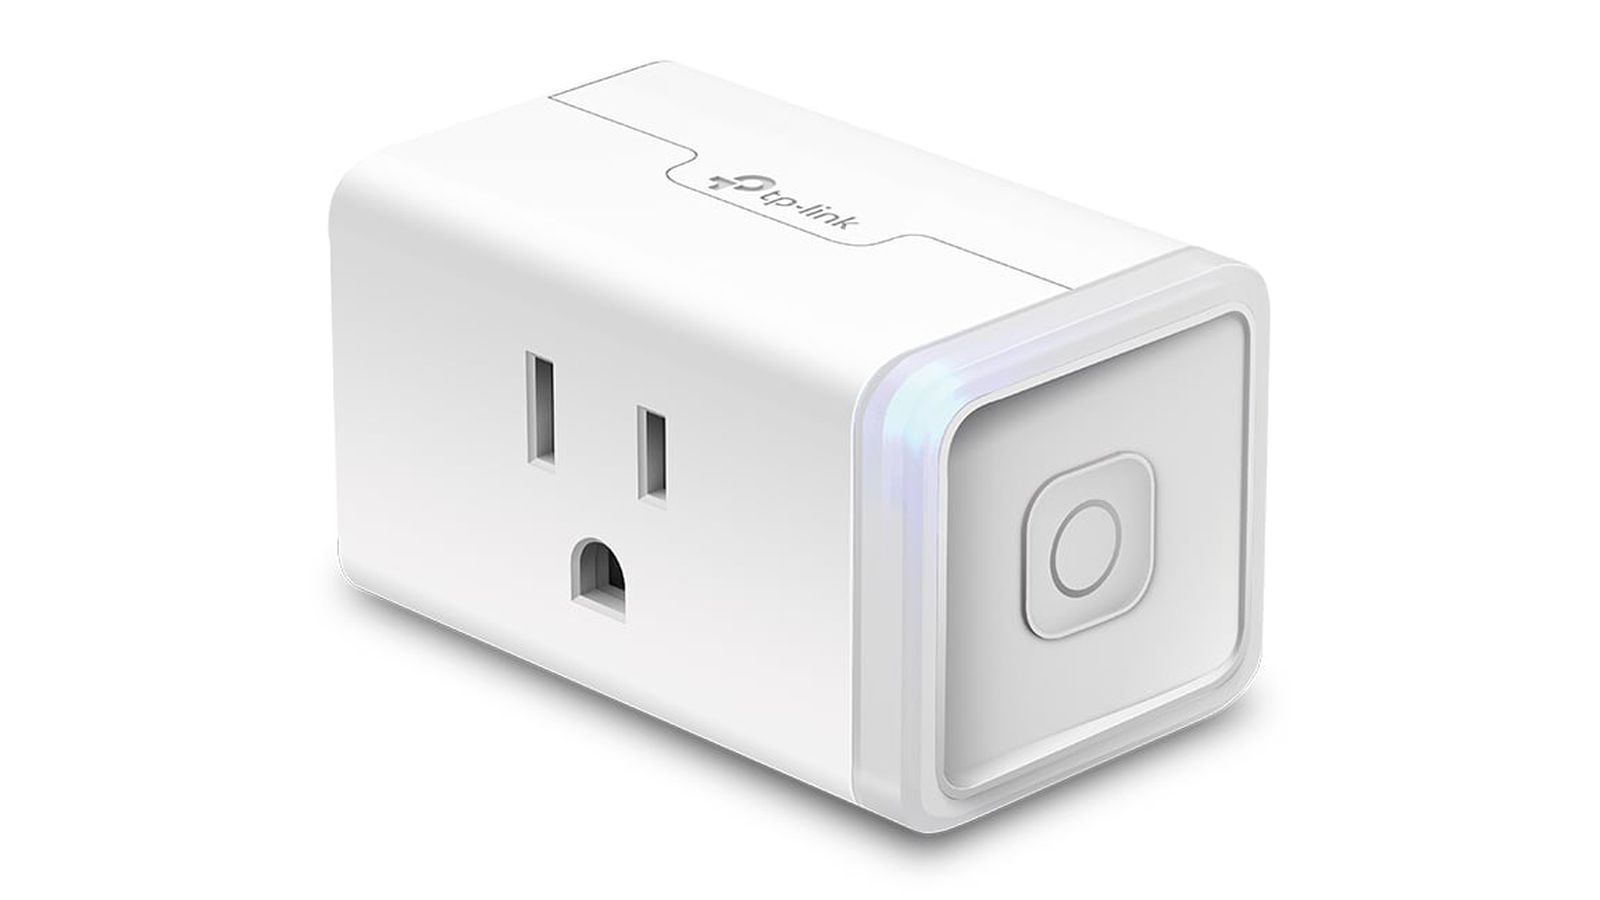 5GHz Smart Plug? These models support faster Wi-Fi, but do you need it?